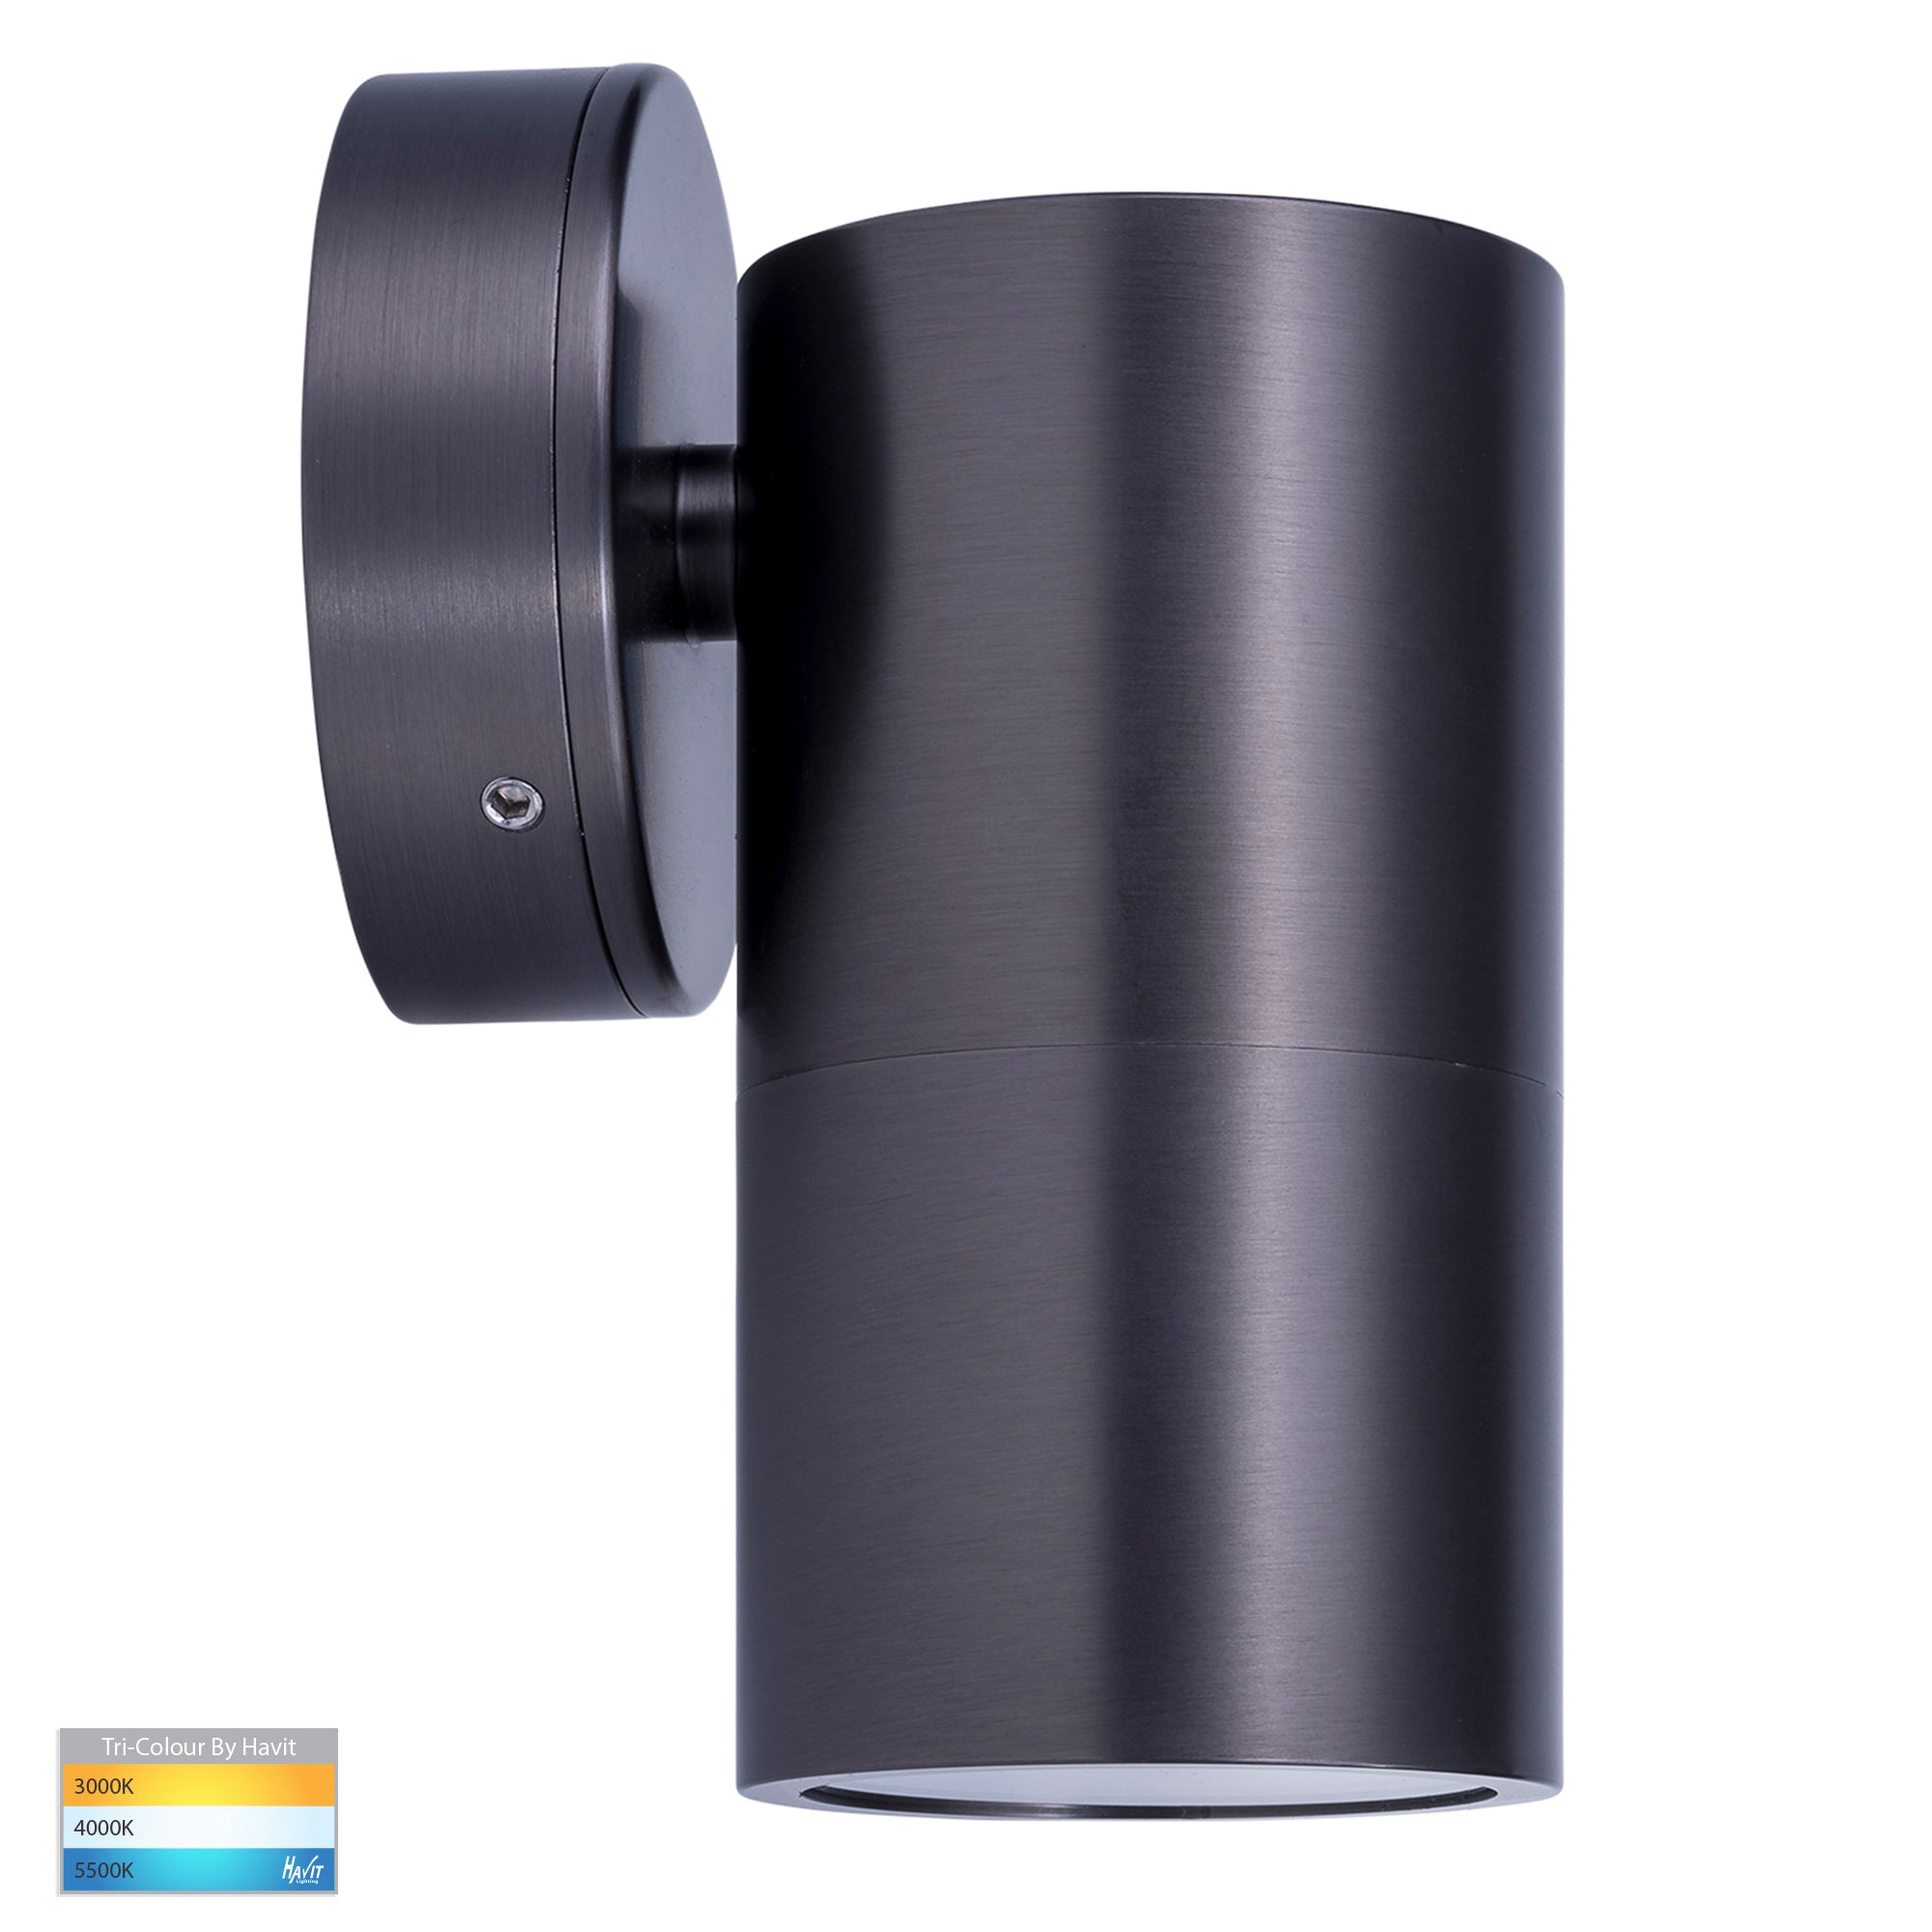 HV1175T-HV1177T - Tivah Solid Brass Graphite Coloured TRI Colour Fixed Down Wall Pillar Lights